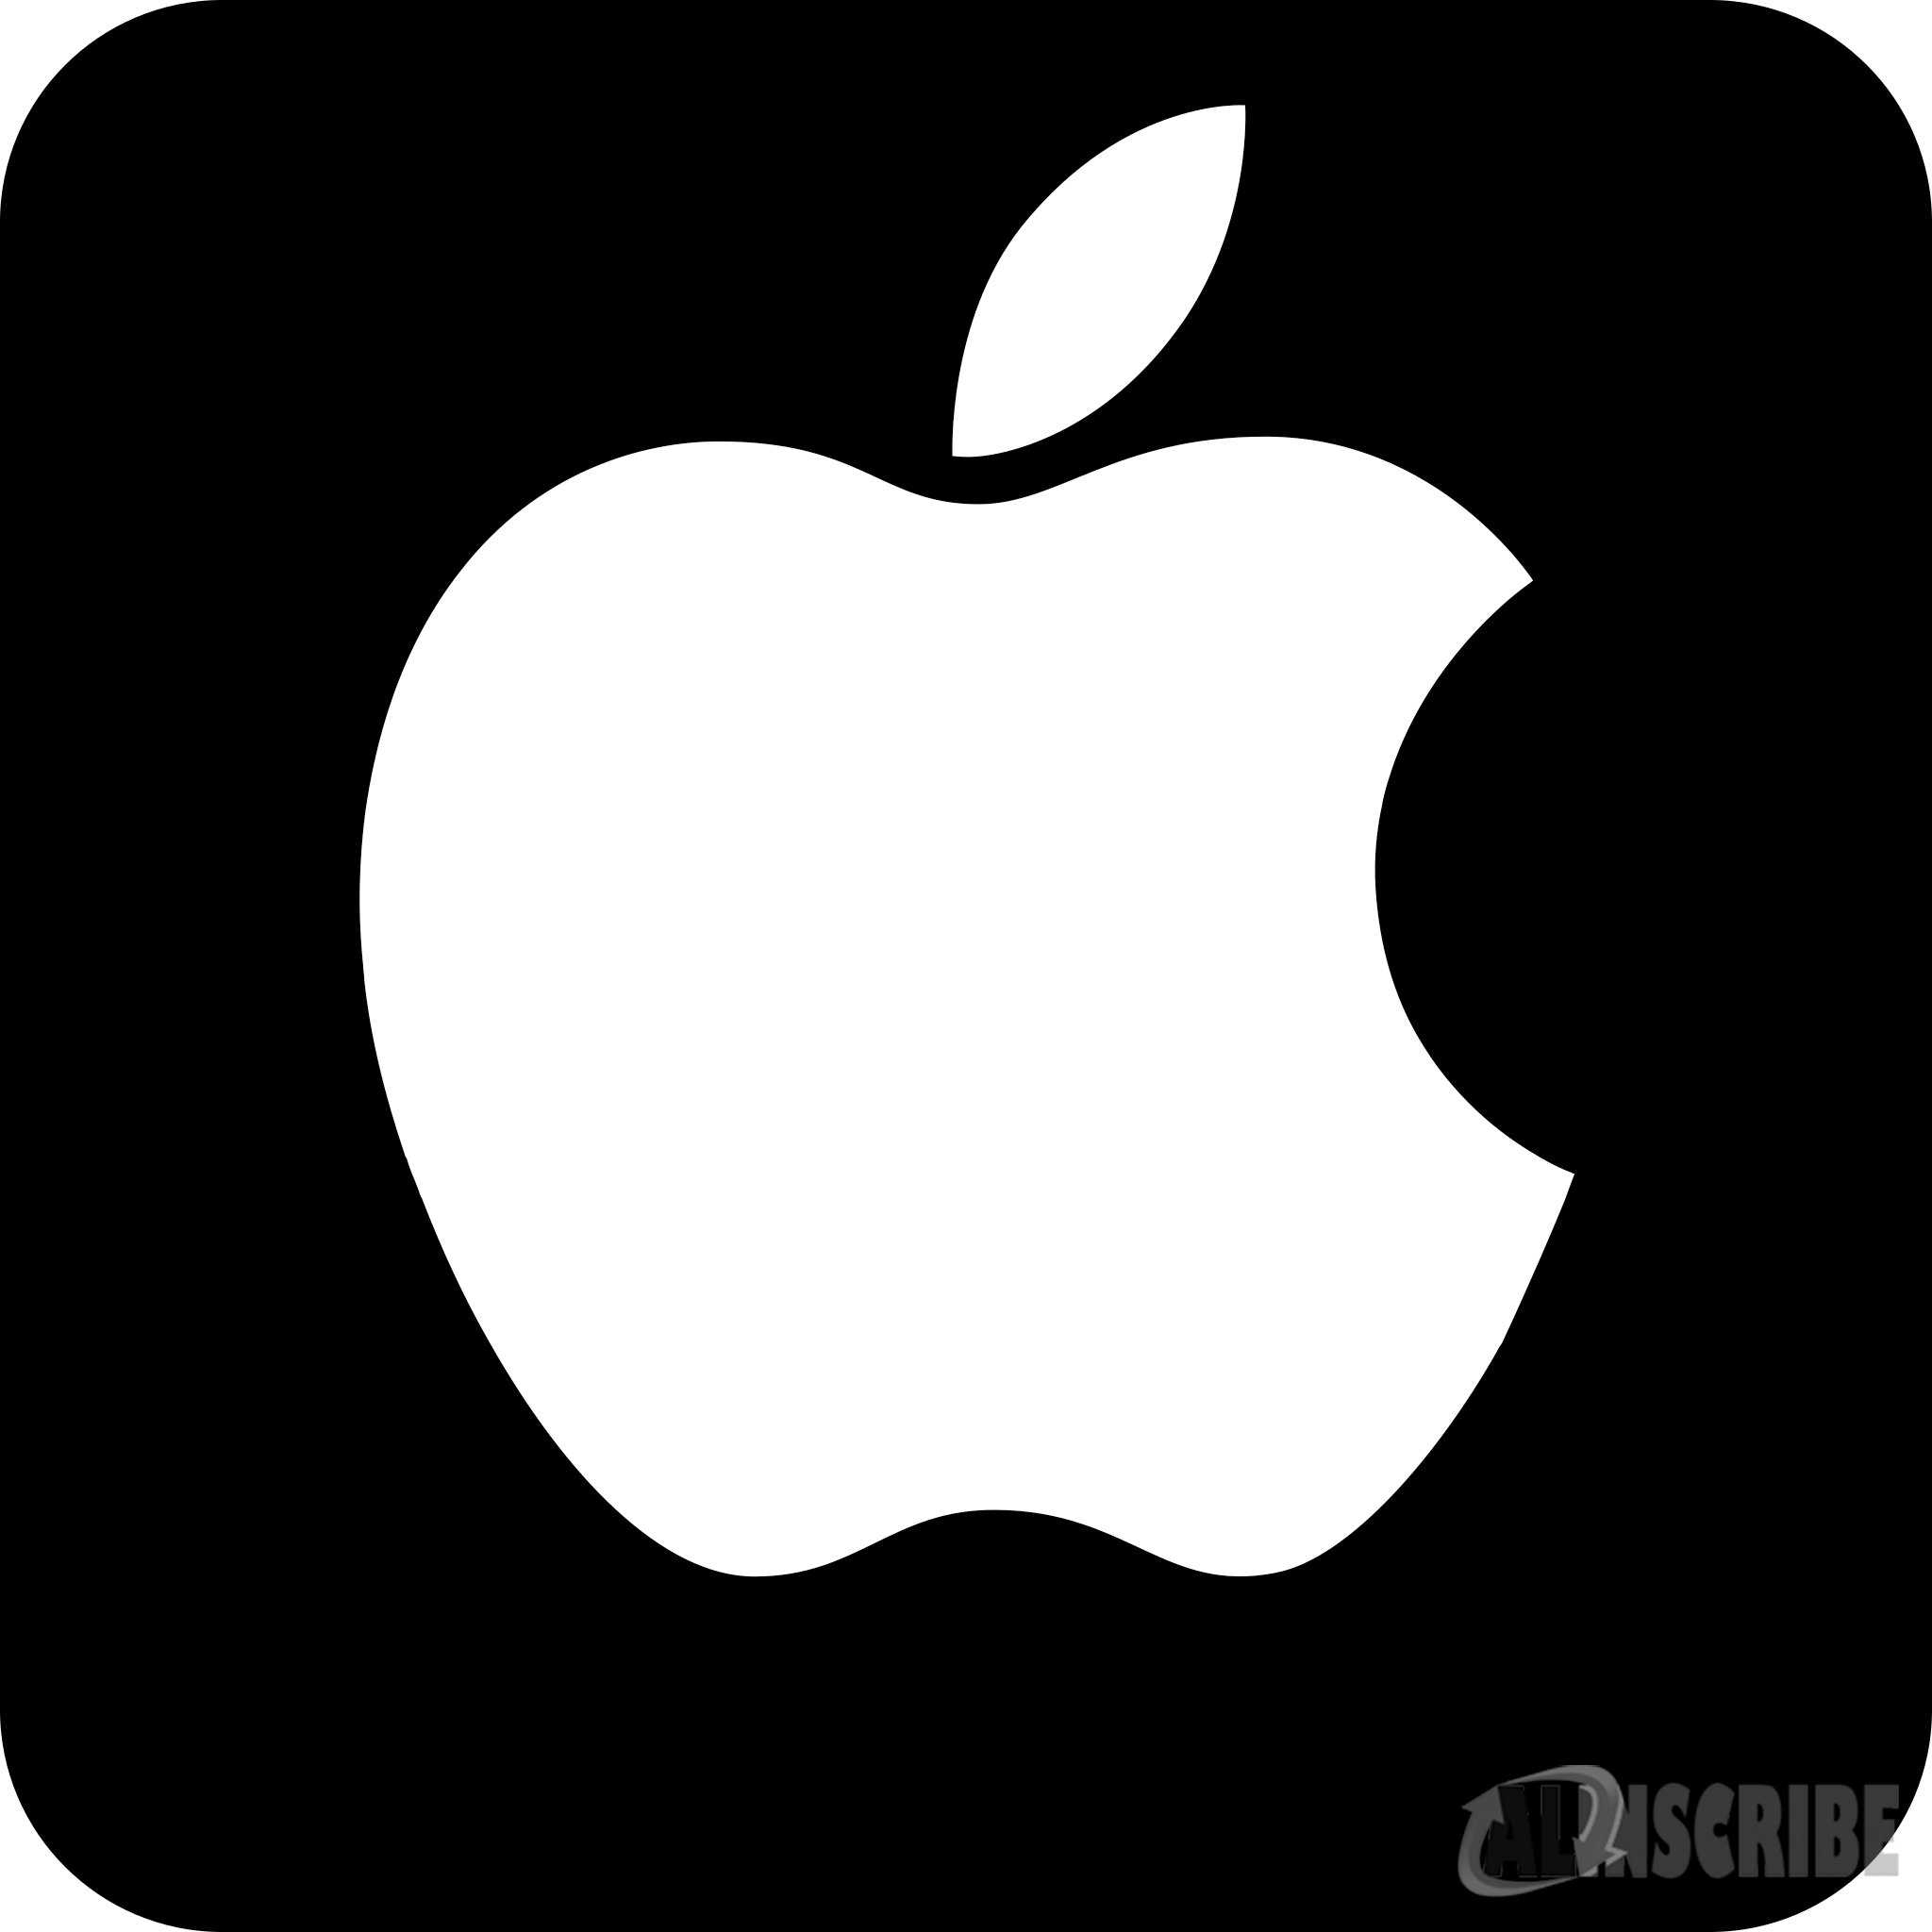 Apple Inc. | A Company review & knowledge of technology that  changed our lives